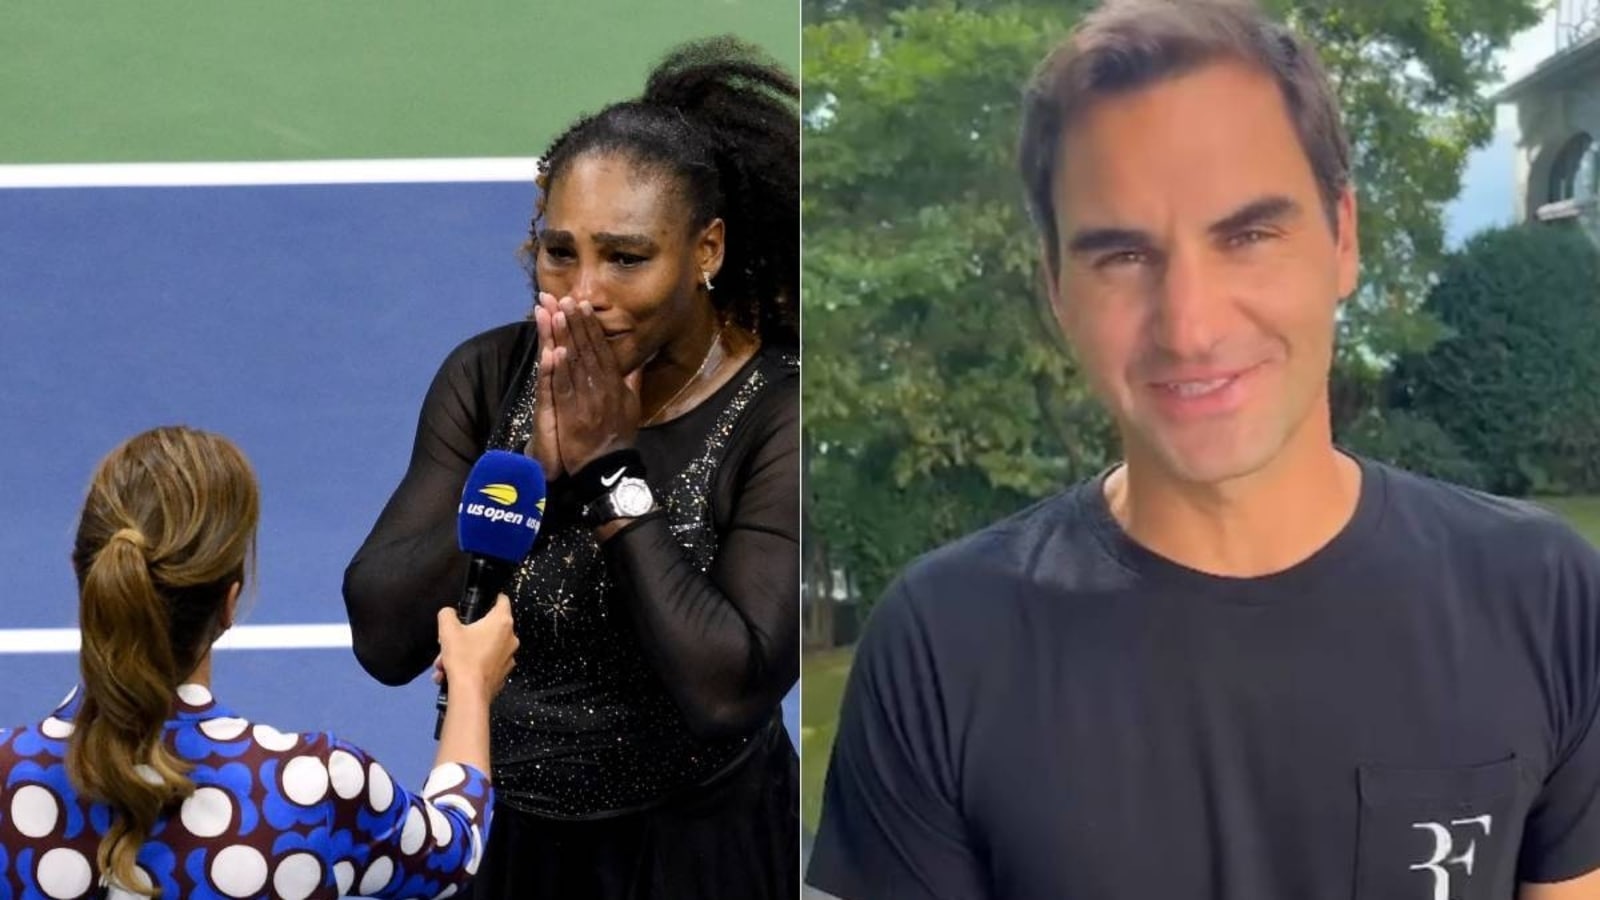 Roger Federer’s priceless message to Serena Williams after emotional US Open exit: ‘Please return to tennis’